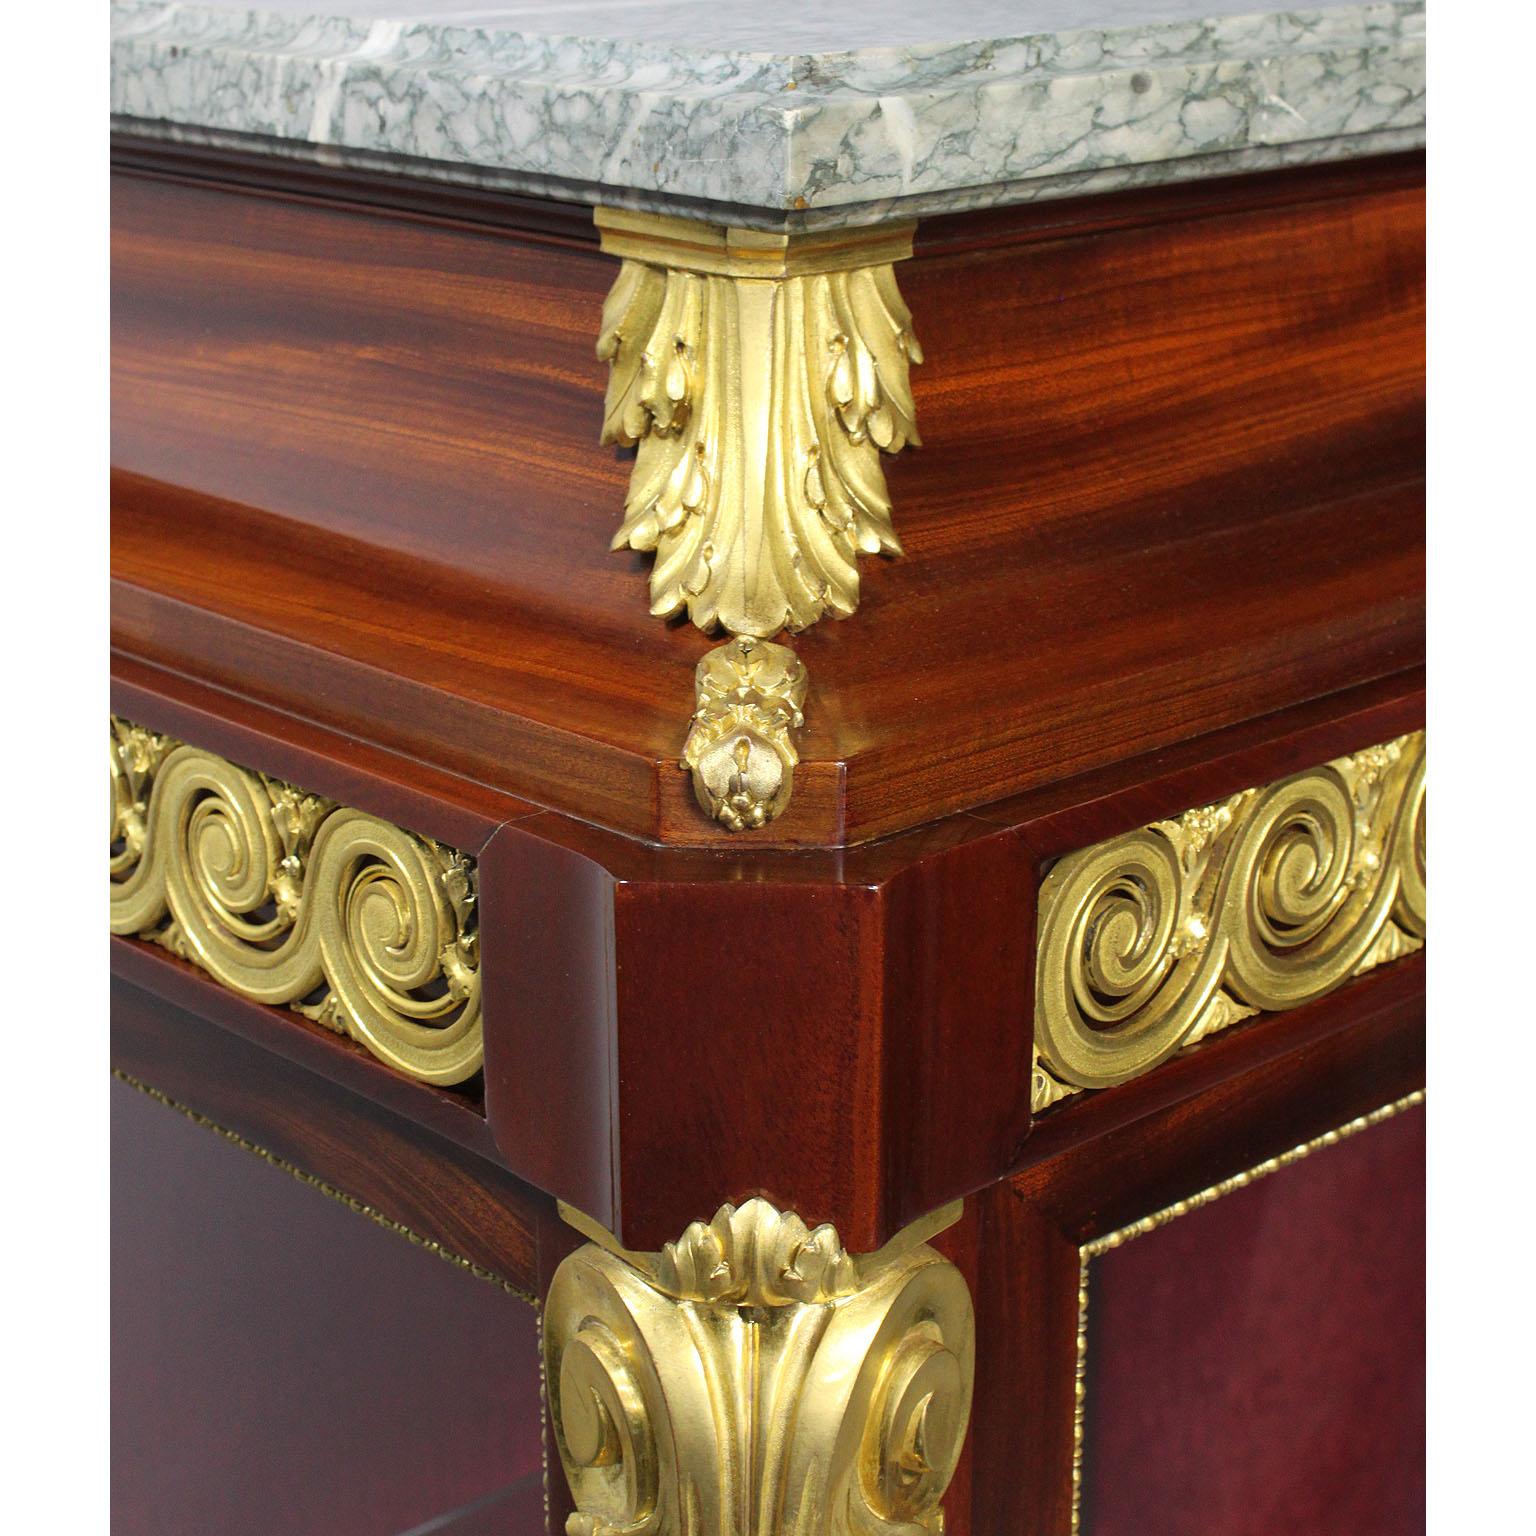 Early 20th Century French 19th-20th Century Louis XV Style Mahogany and Ormolu Mounted Vitrine For Sale